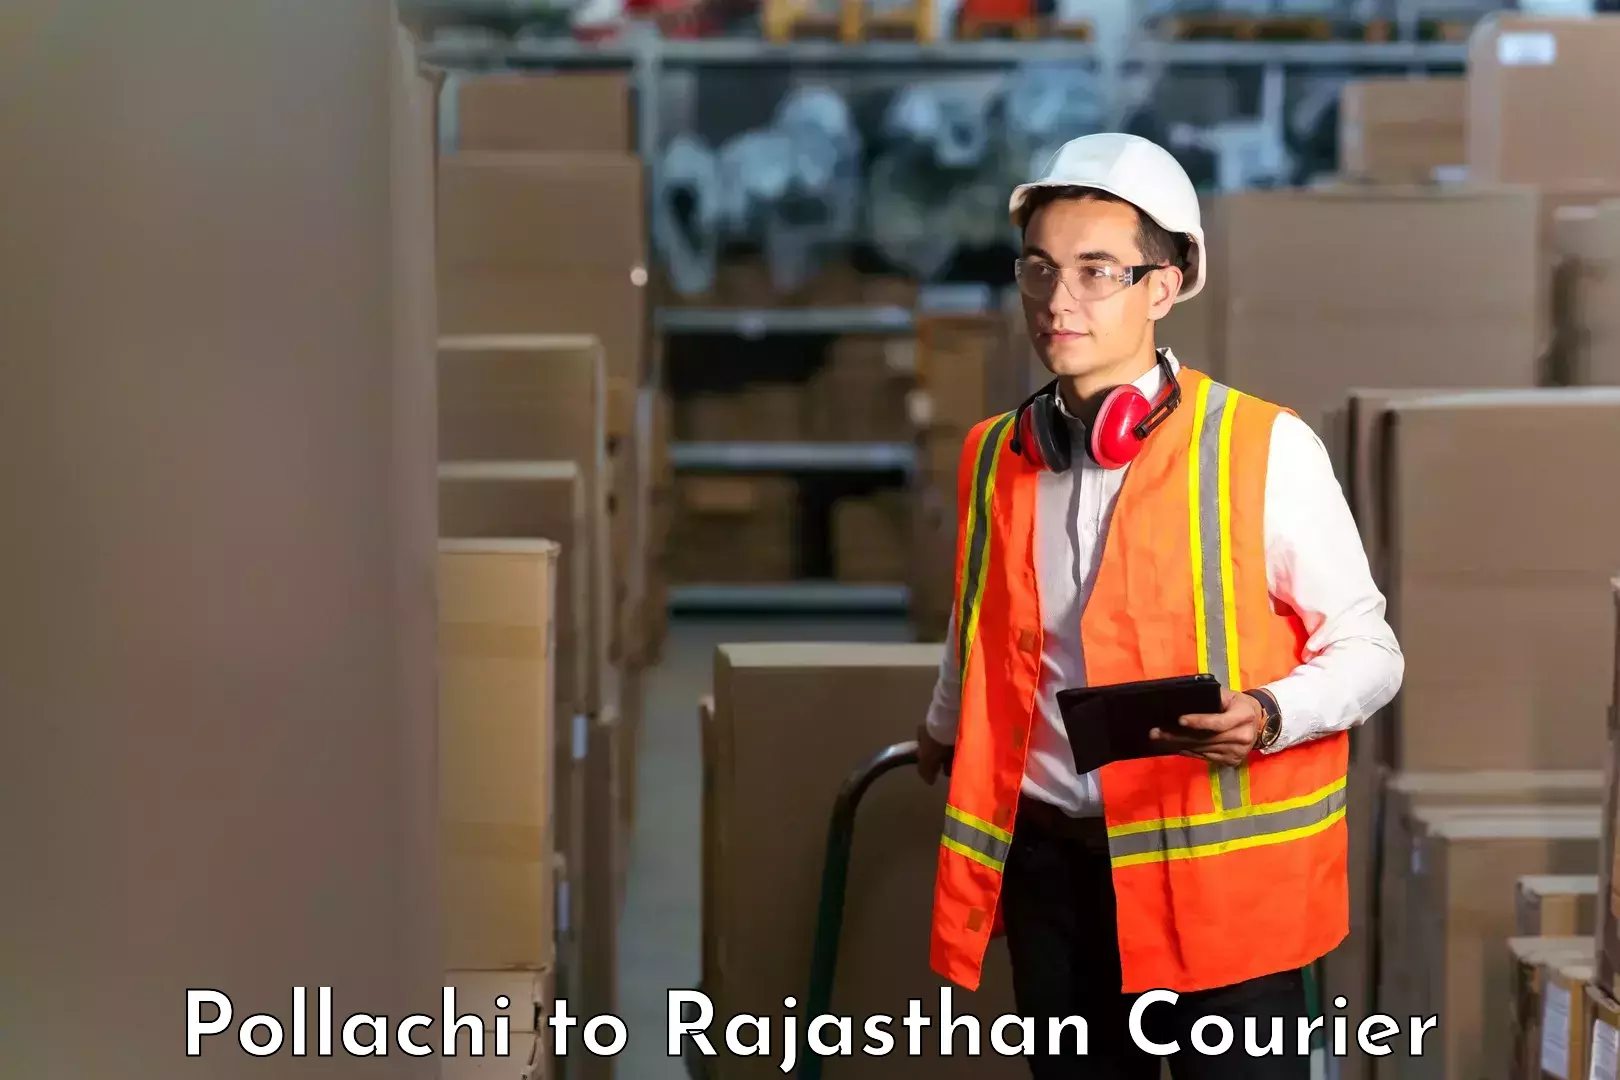 Courier service innovation Pollachi to Rajasthan